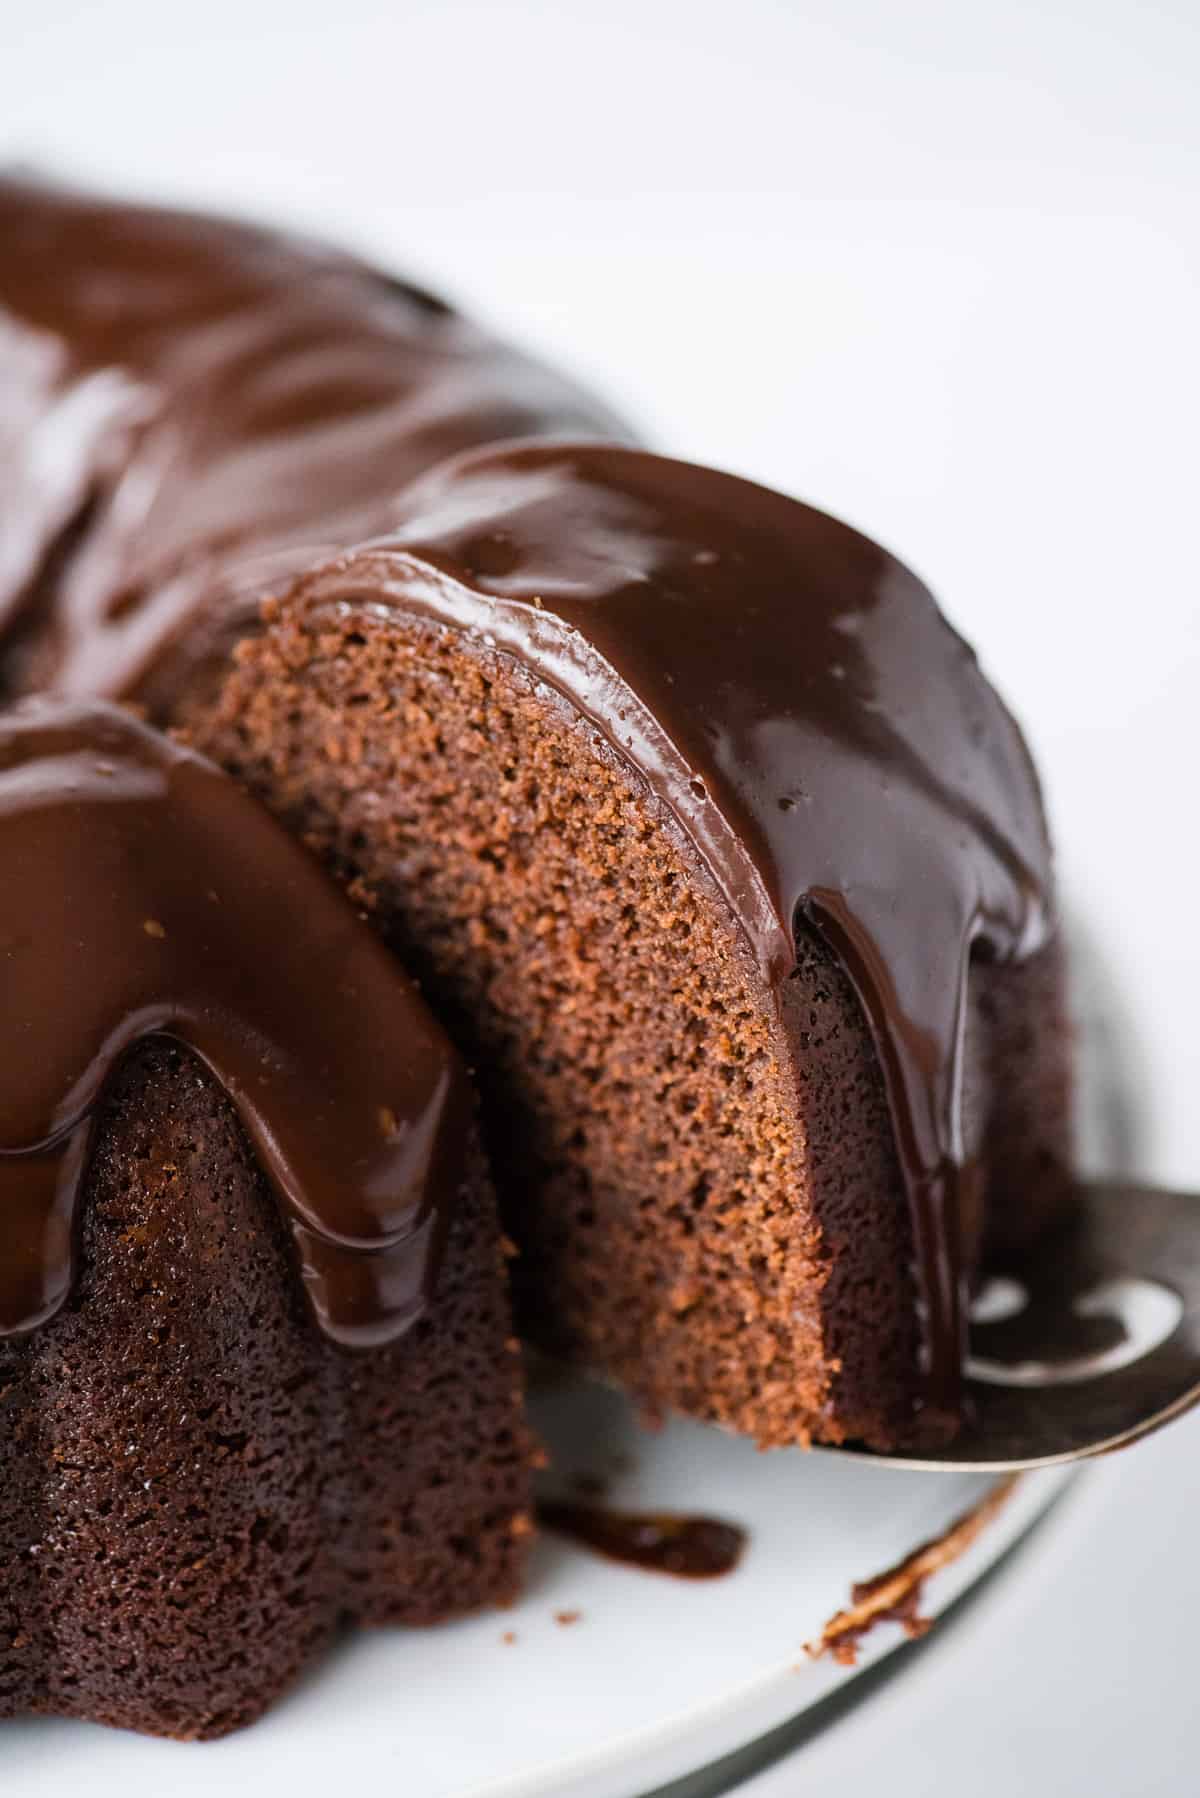 slice of chocolate bundt cake with chocolate glaze being removed from the cake on metal spatula on white background